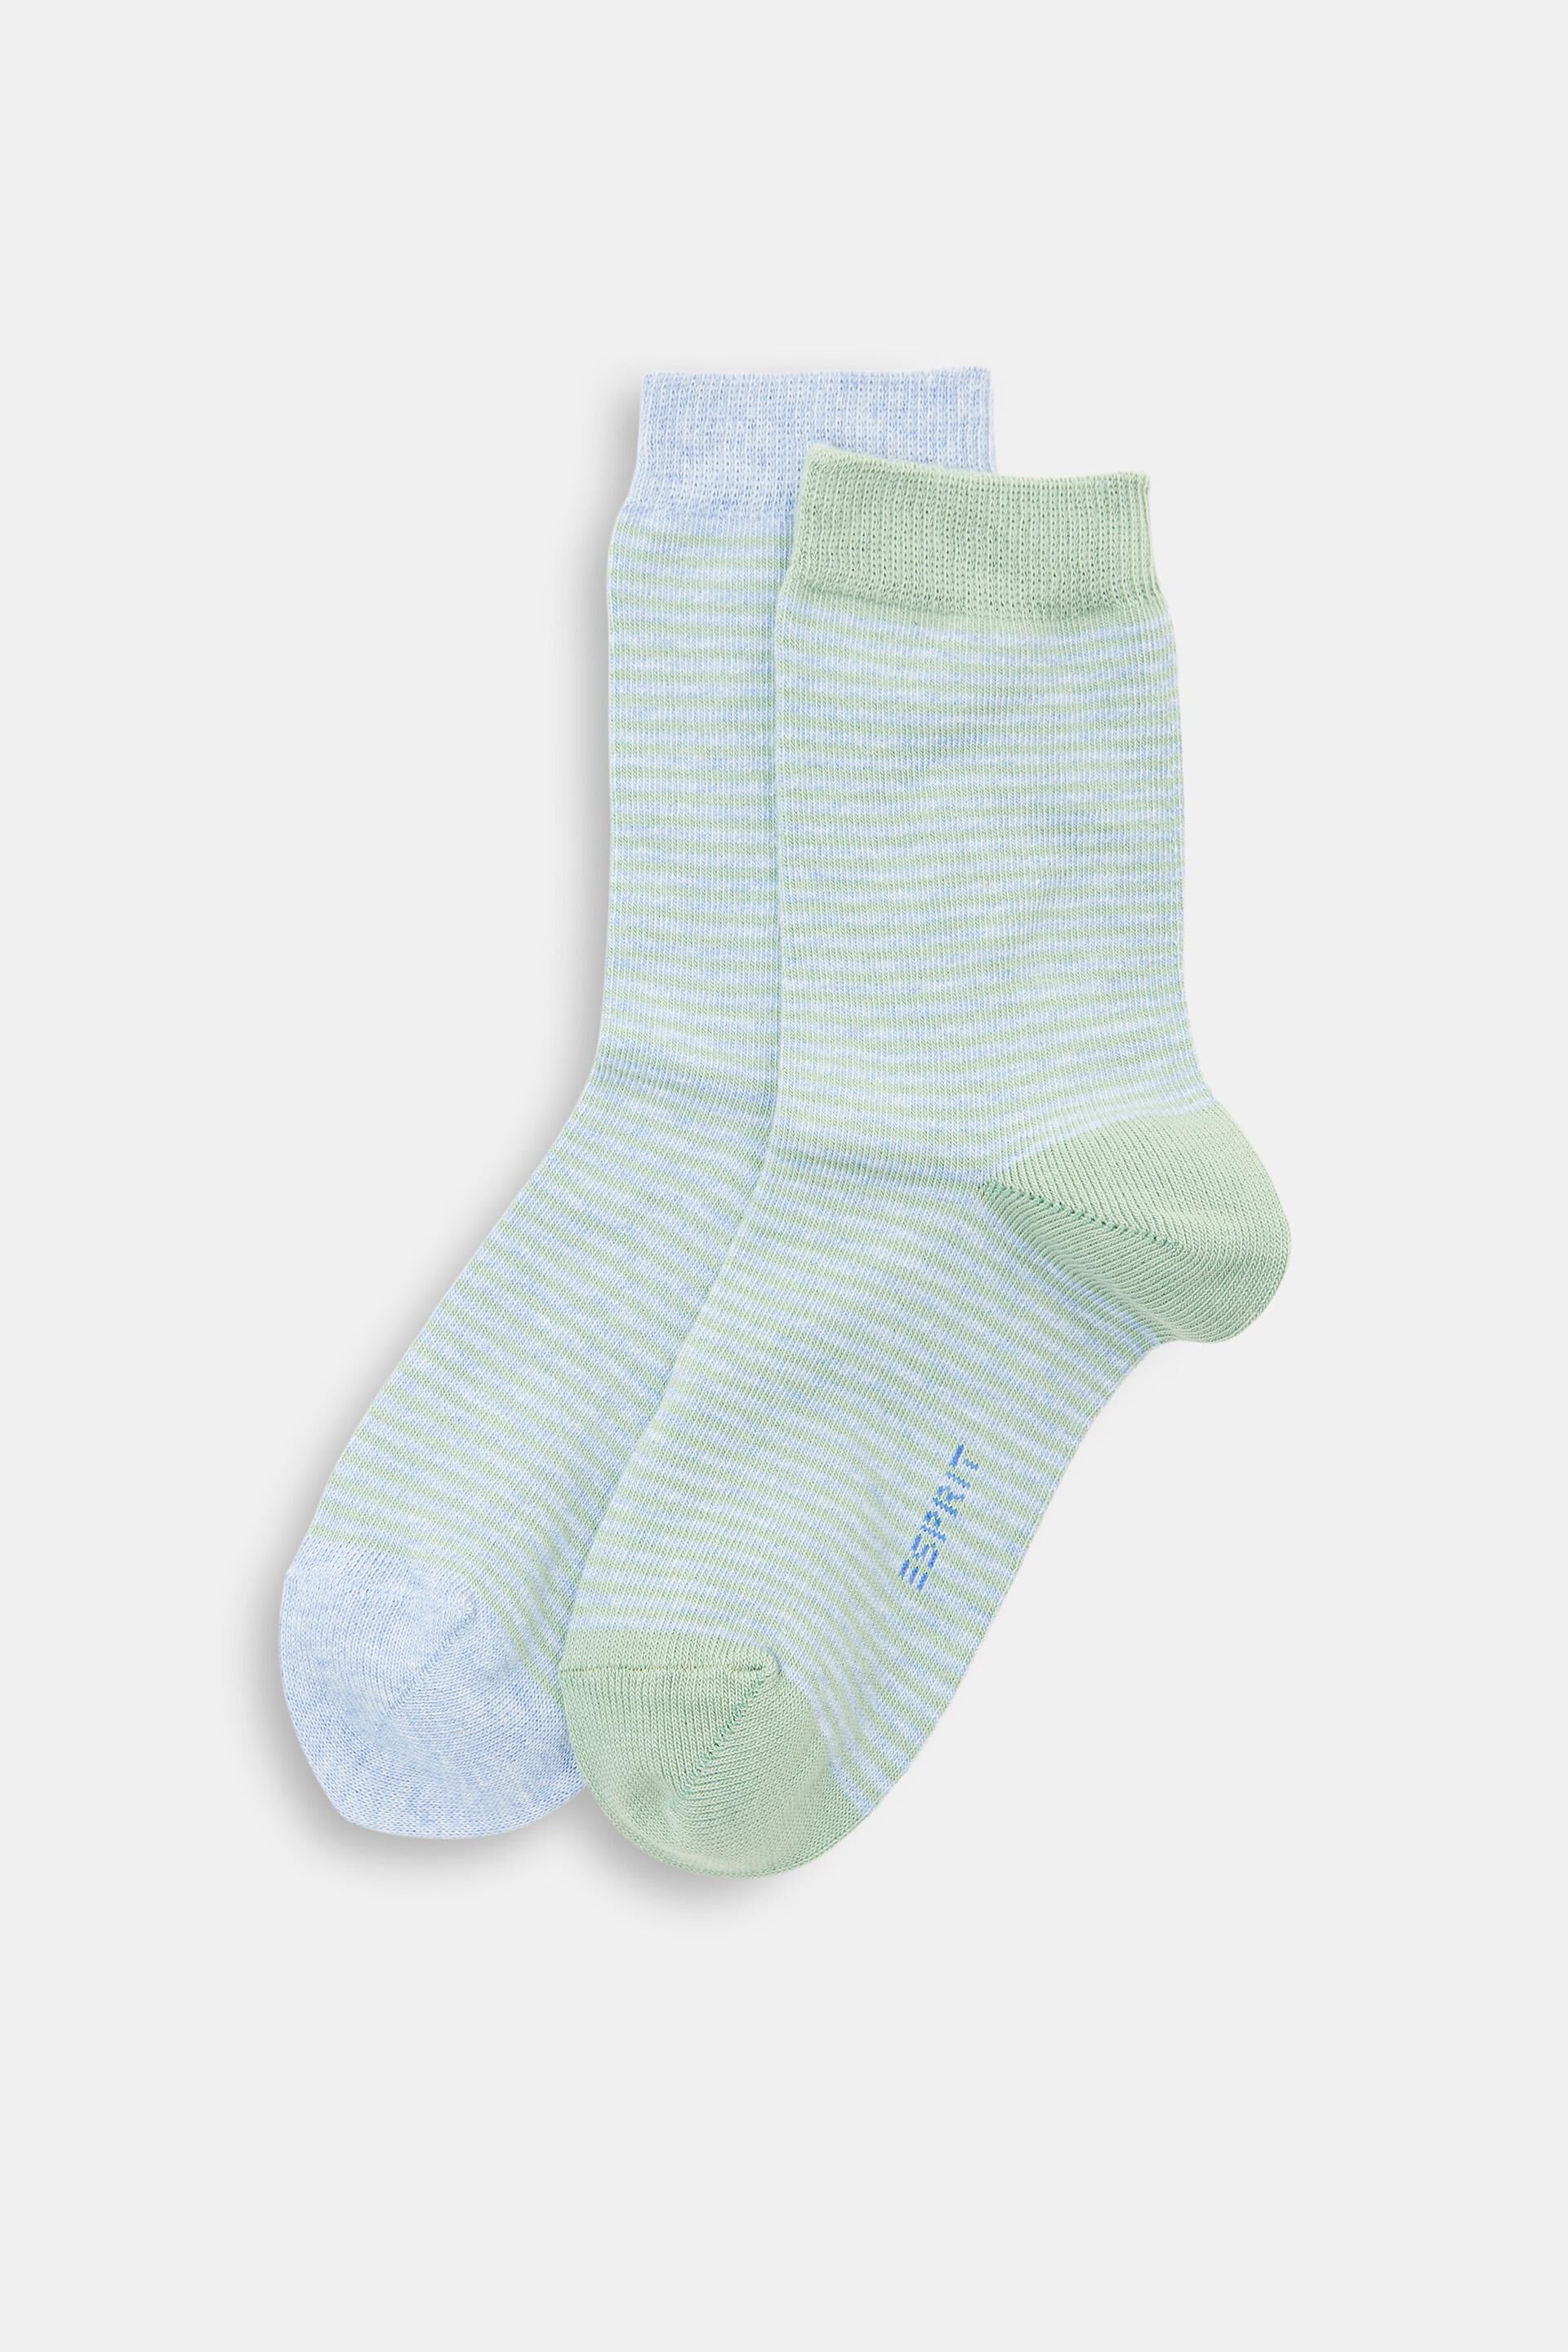 Esprit of socks, organic Double striped pack cotton